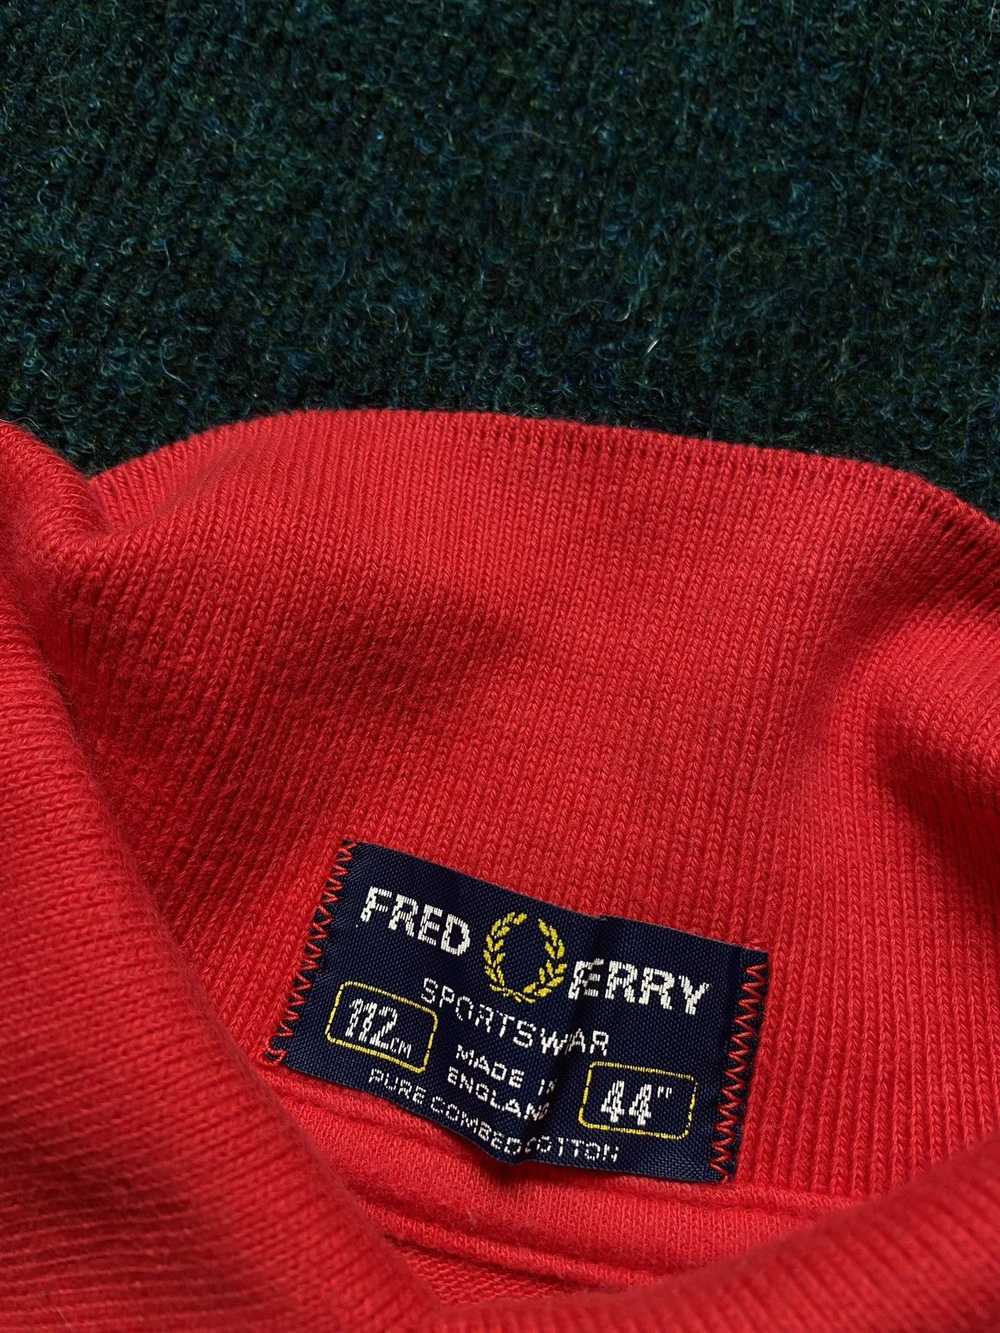 Fred Perry × Sportswear × Vintage Fred Perry Spor… - image 6